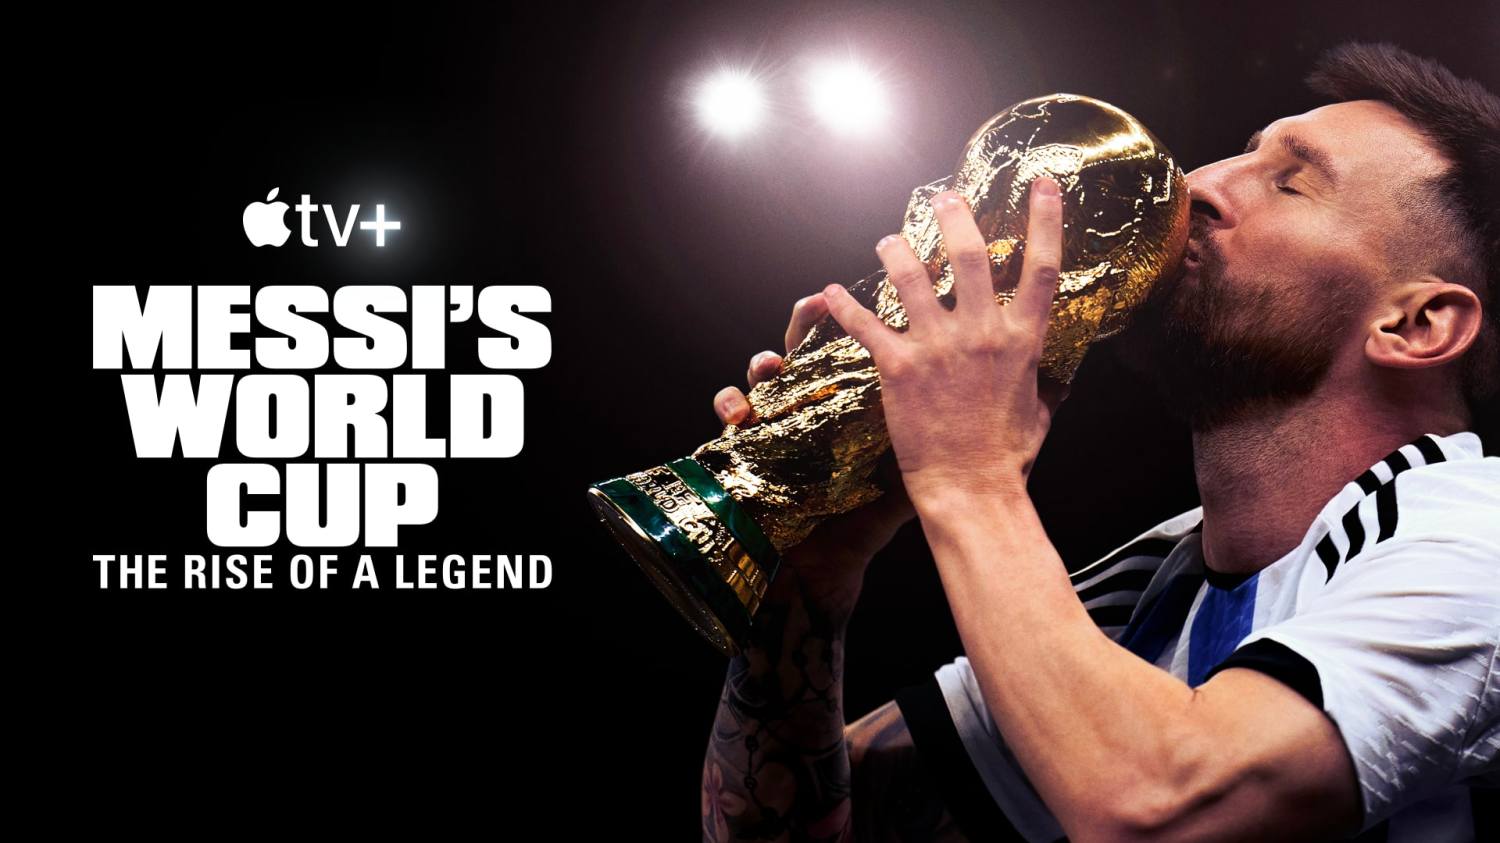 Messi's World Cup: The Rise of a Legend Apple TV Plus